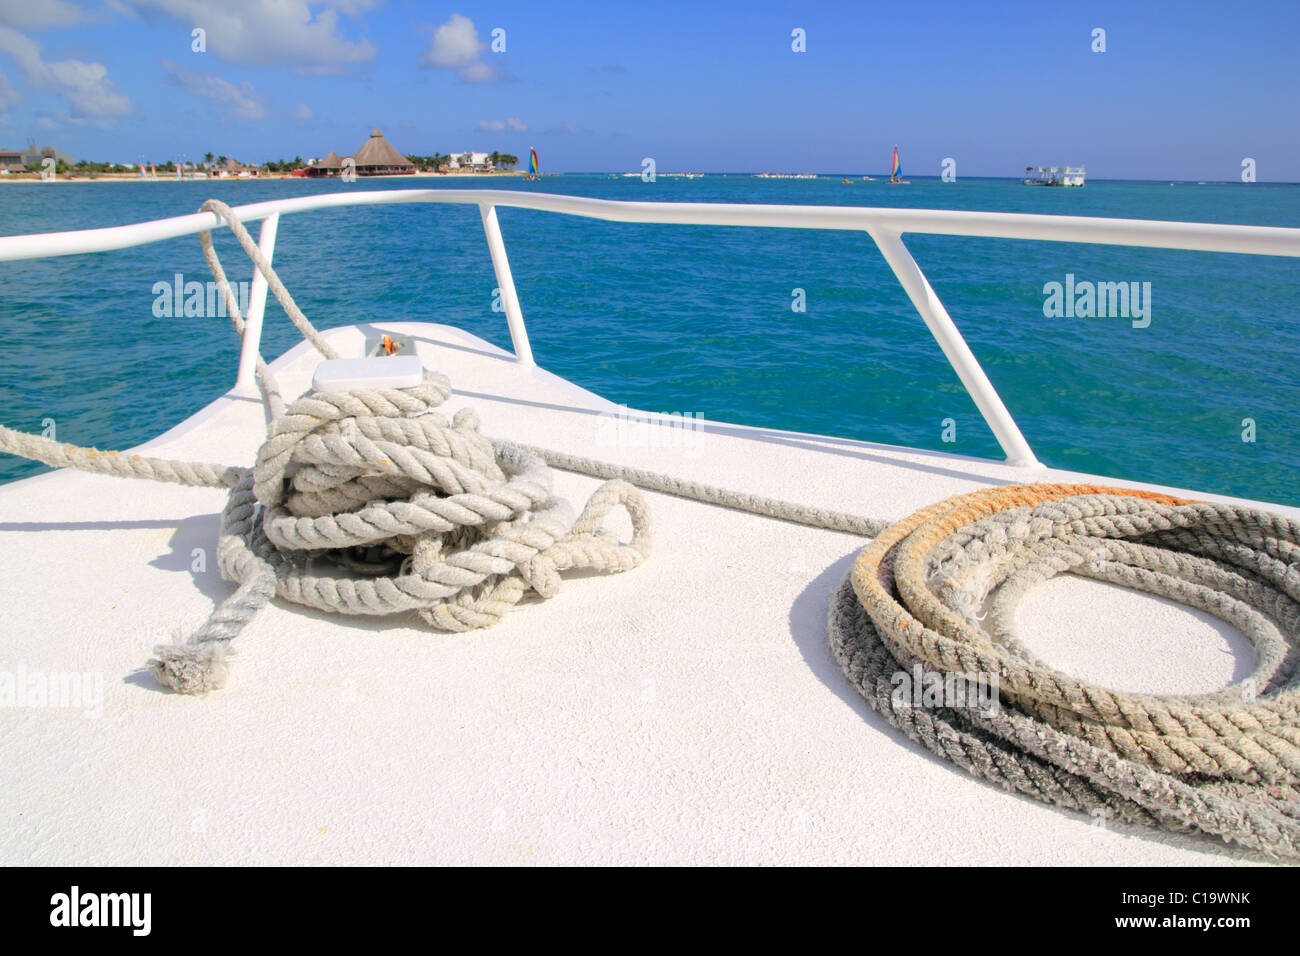 Boat white bow in tropical Caribbean sea summer relax vacations Stock Photo